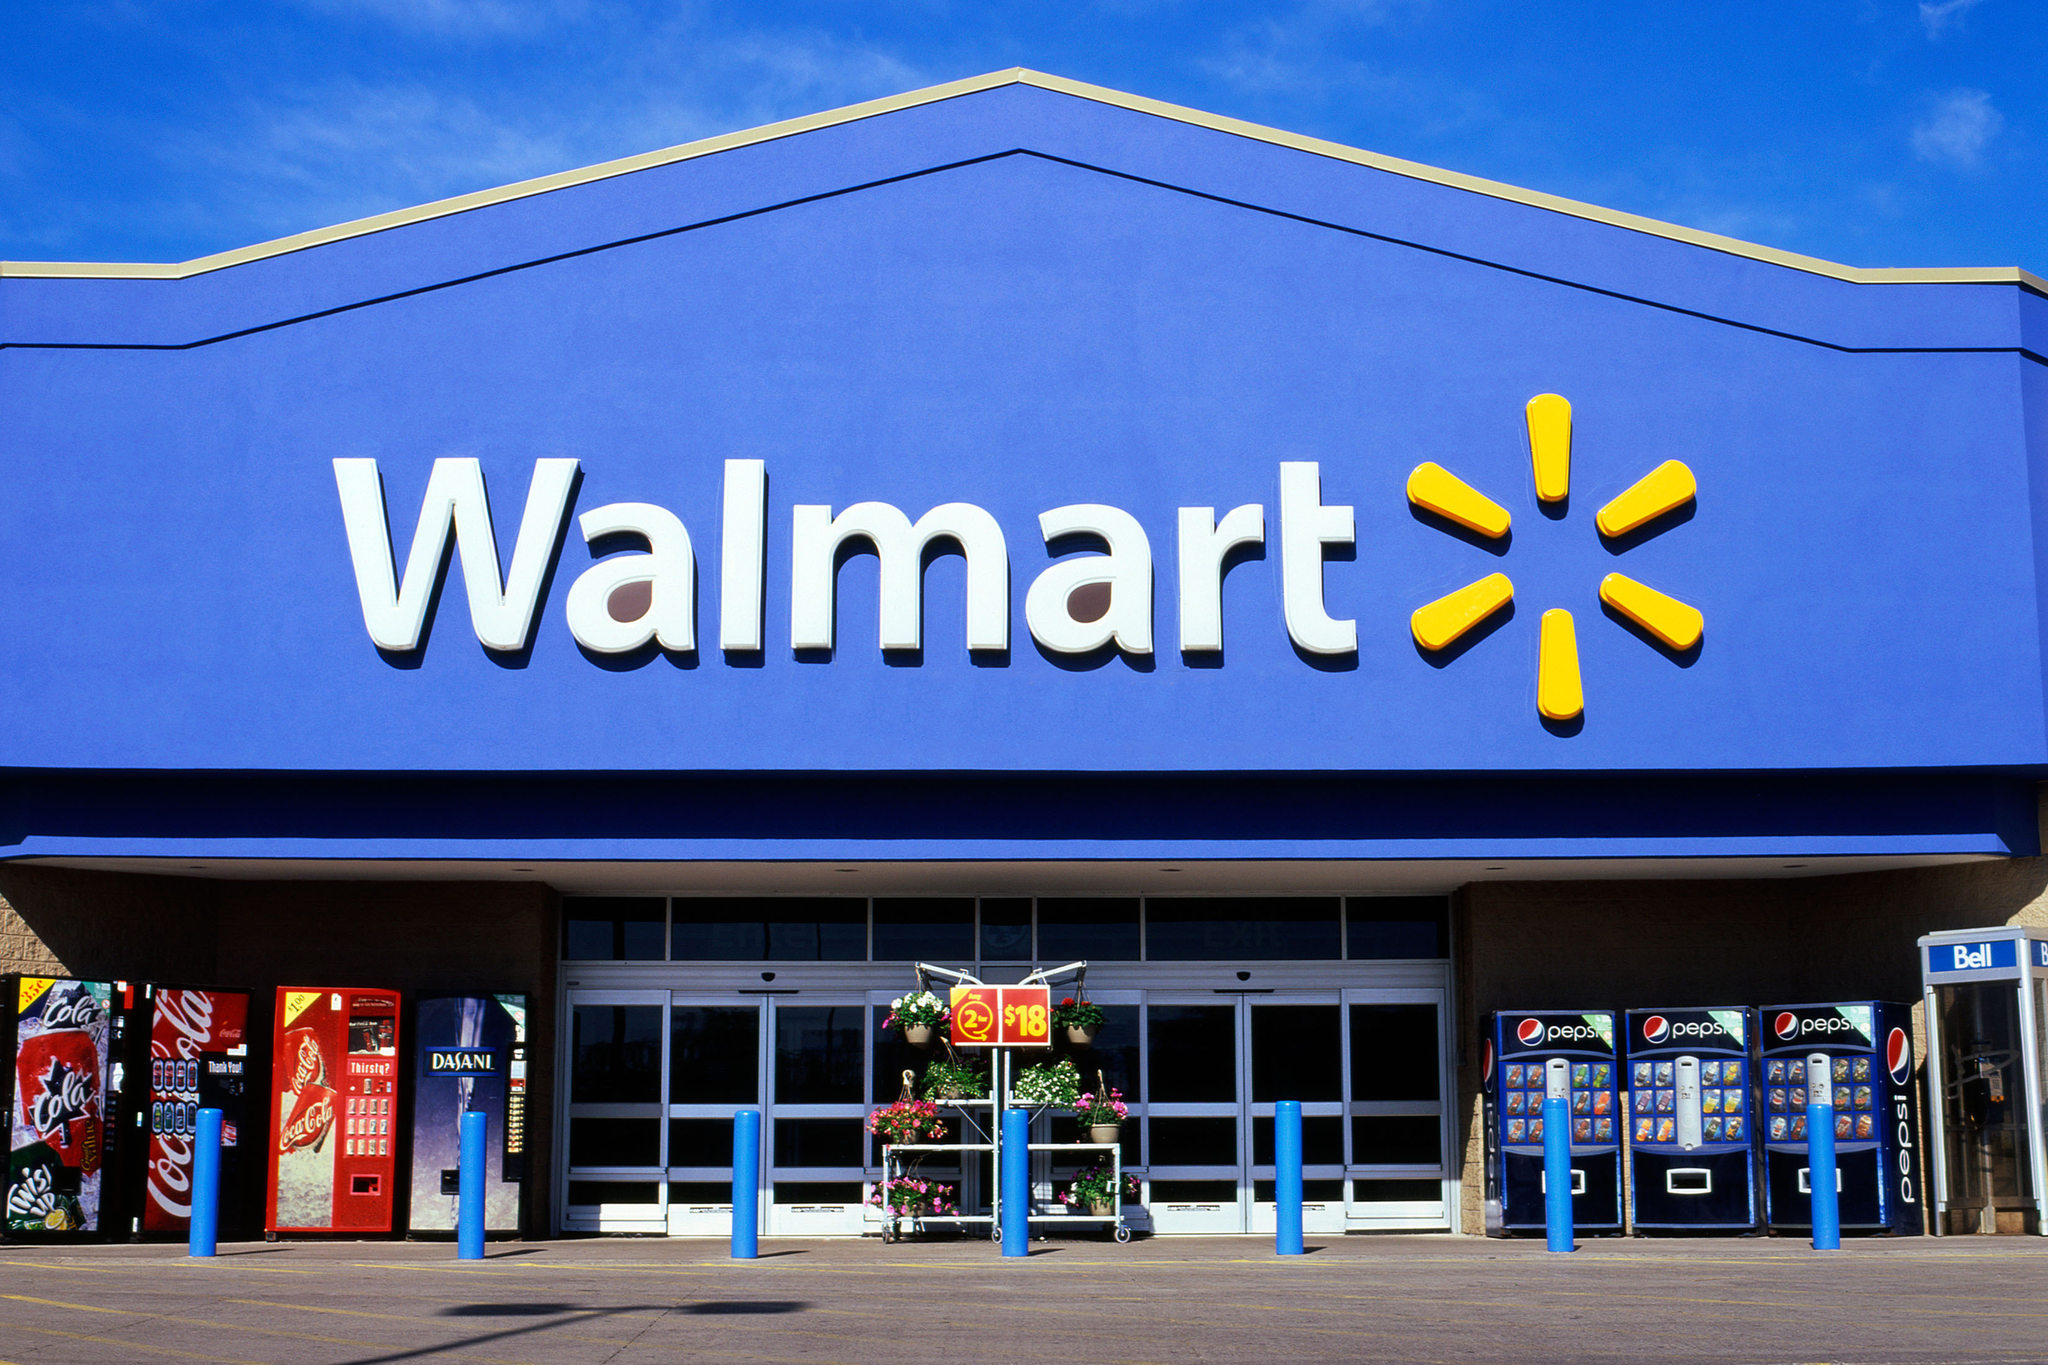 Waltmart invests US$28 million in the State of Mexico